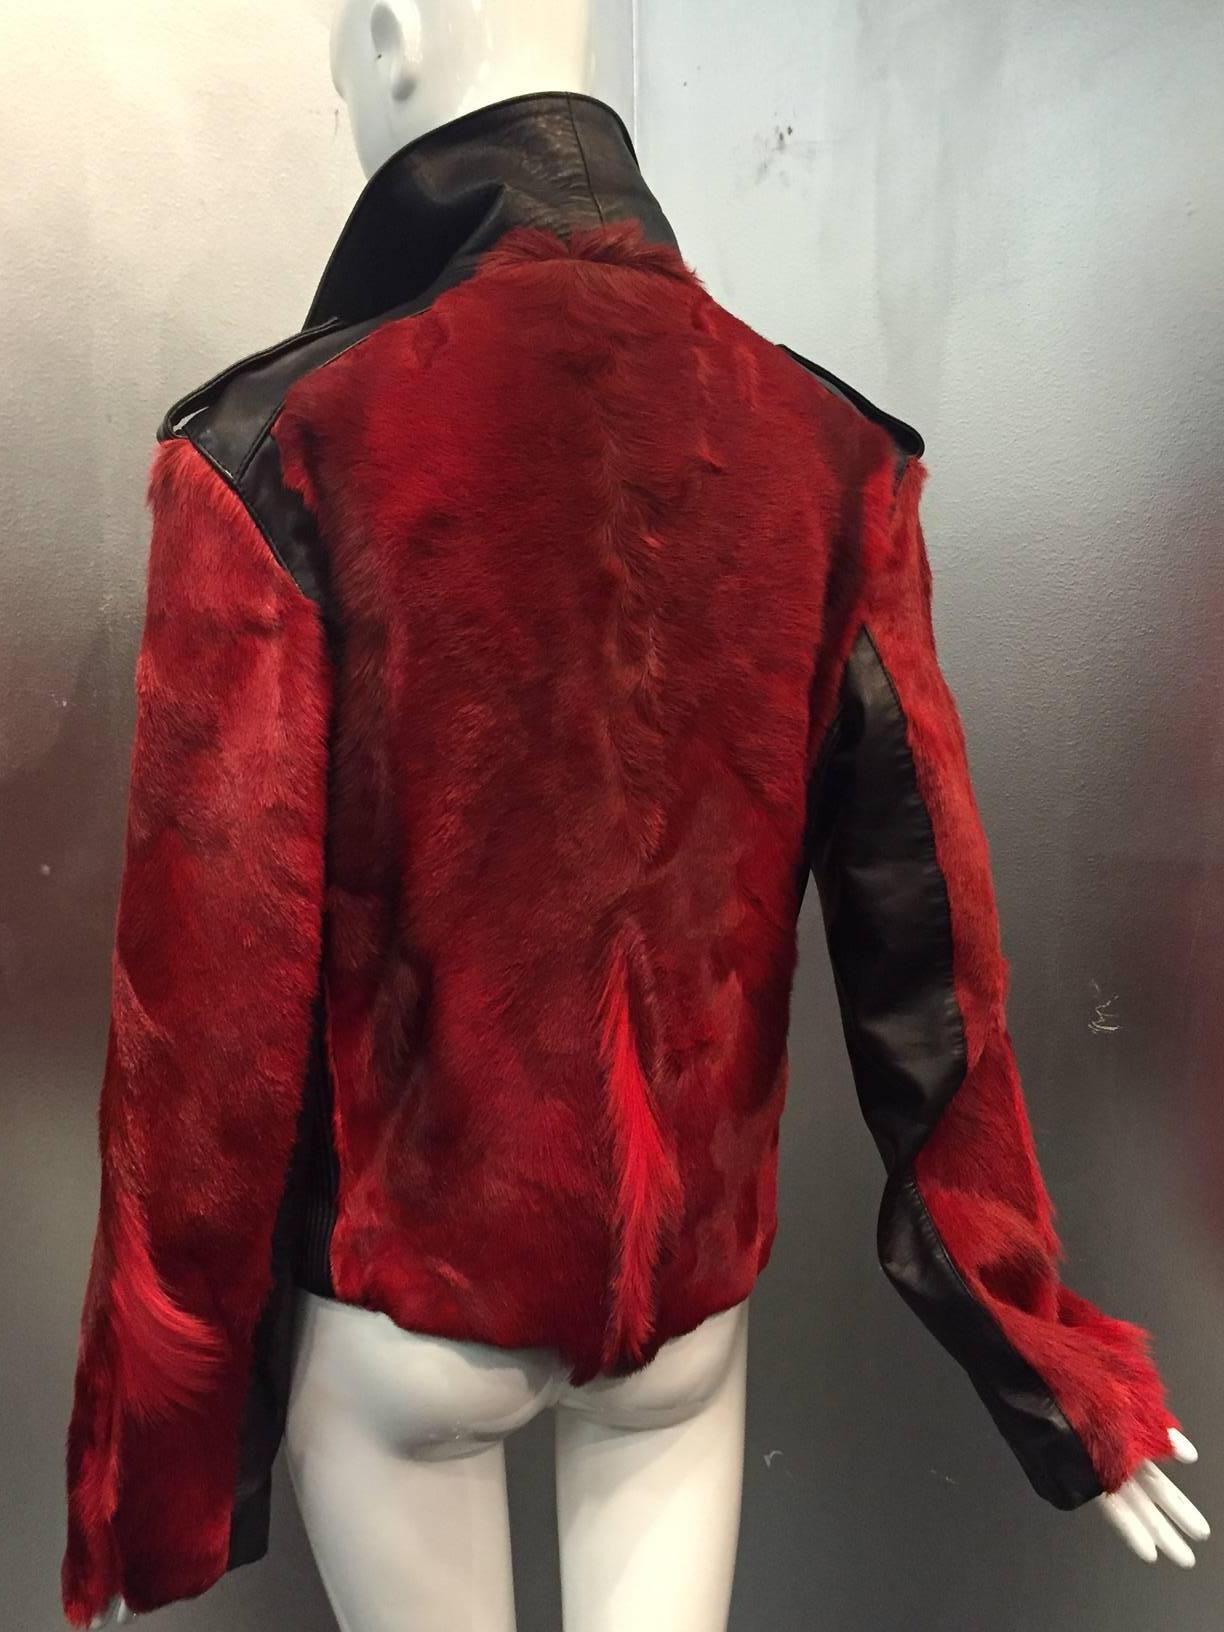 An iconic Dolce & Gabanna motorcycle look in red dyed goat hide and black leather.  